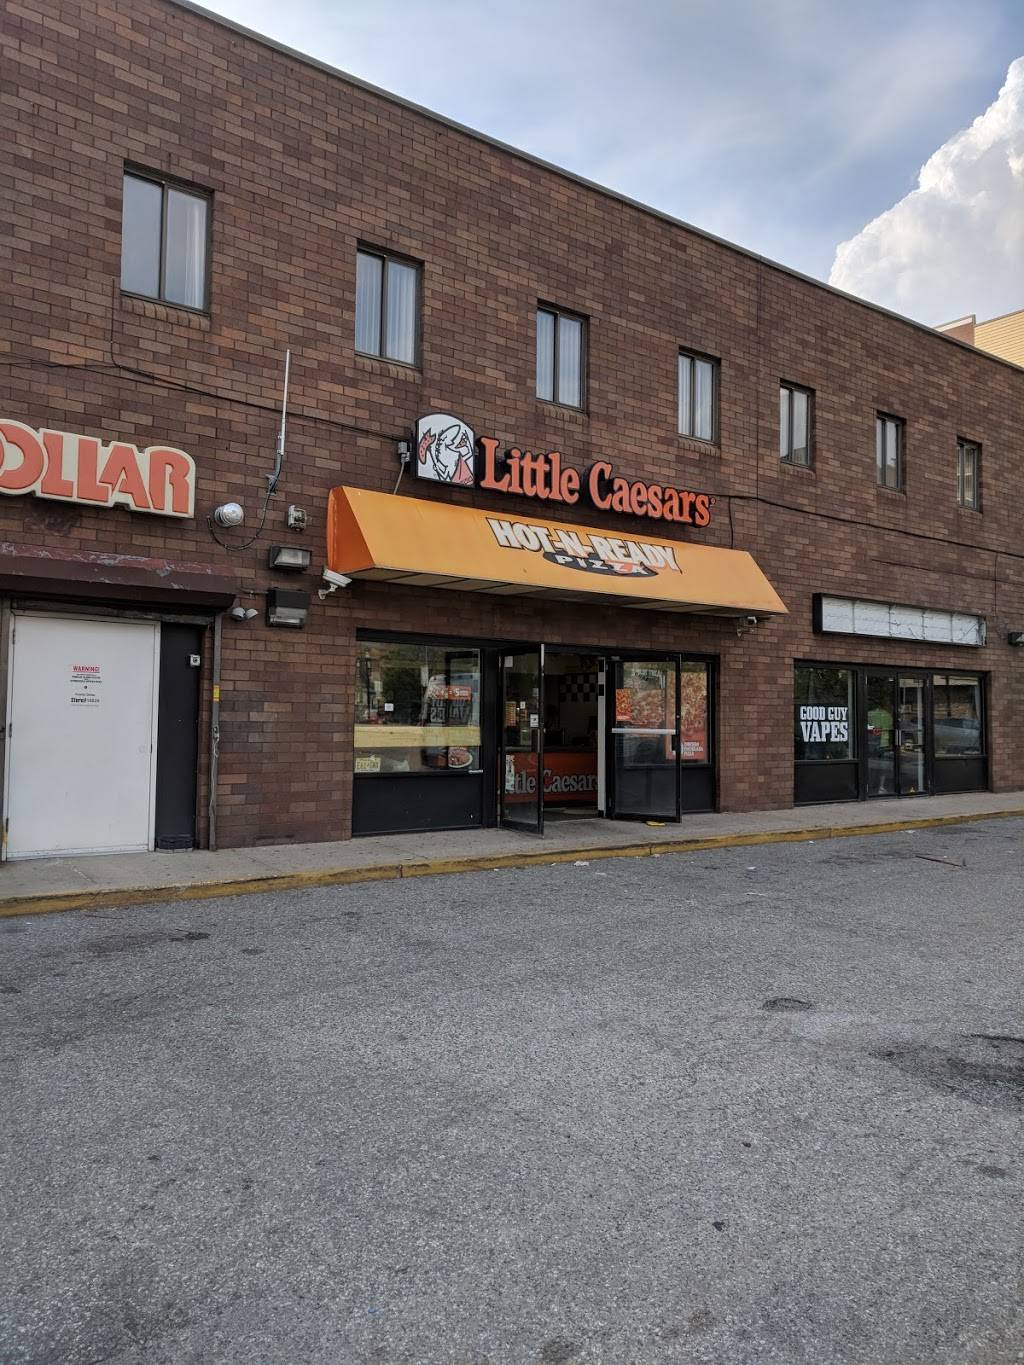 Little Caesars Pizza | meal takeaway | 4809 Park Ave, Union City, NJ 07087, USA | 2017585828 OR +1 201-758-5828